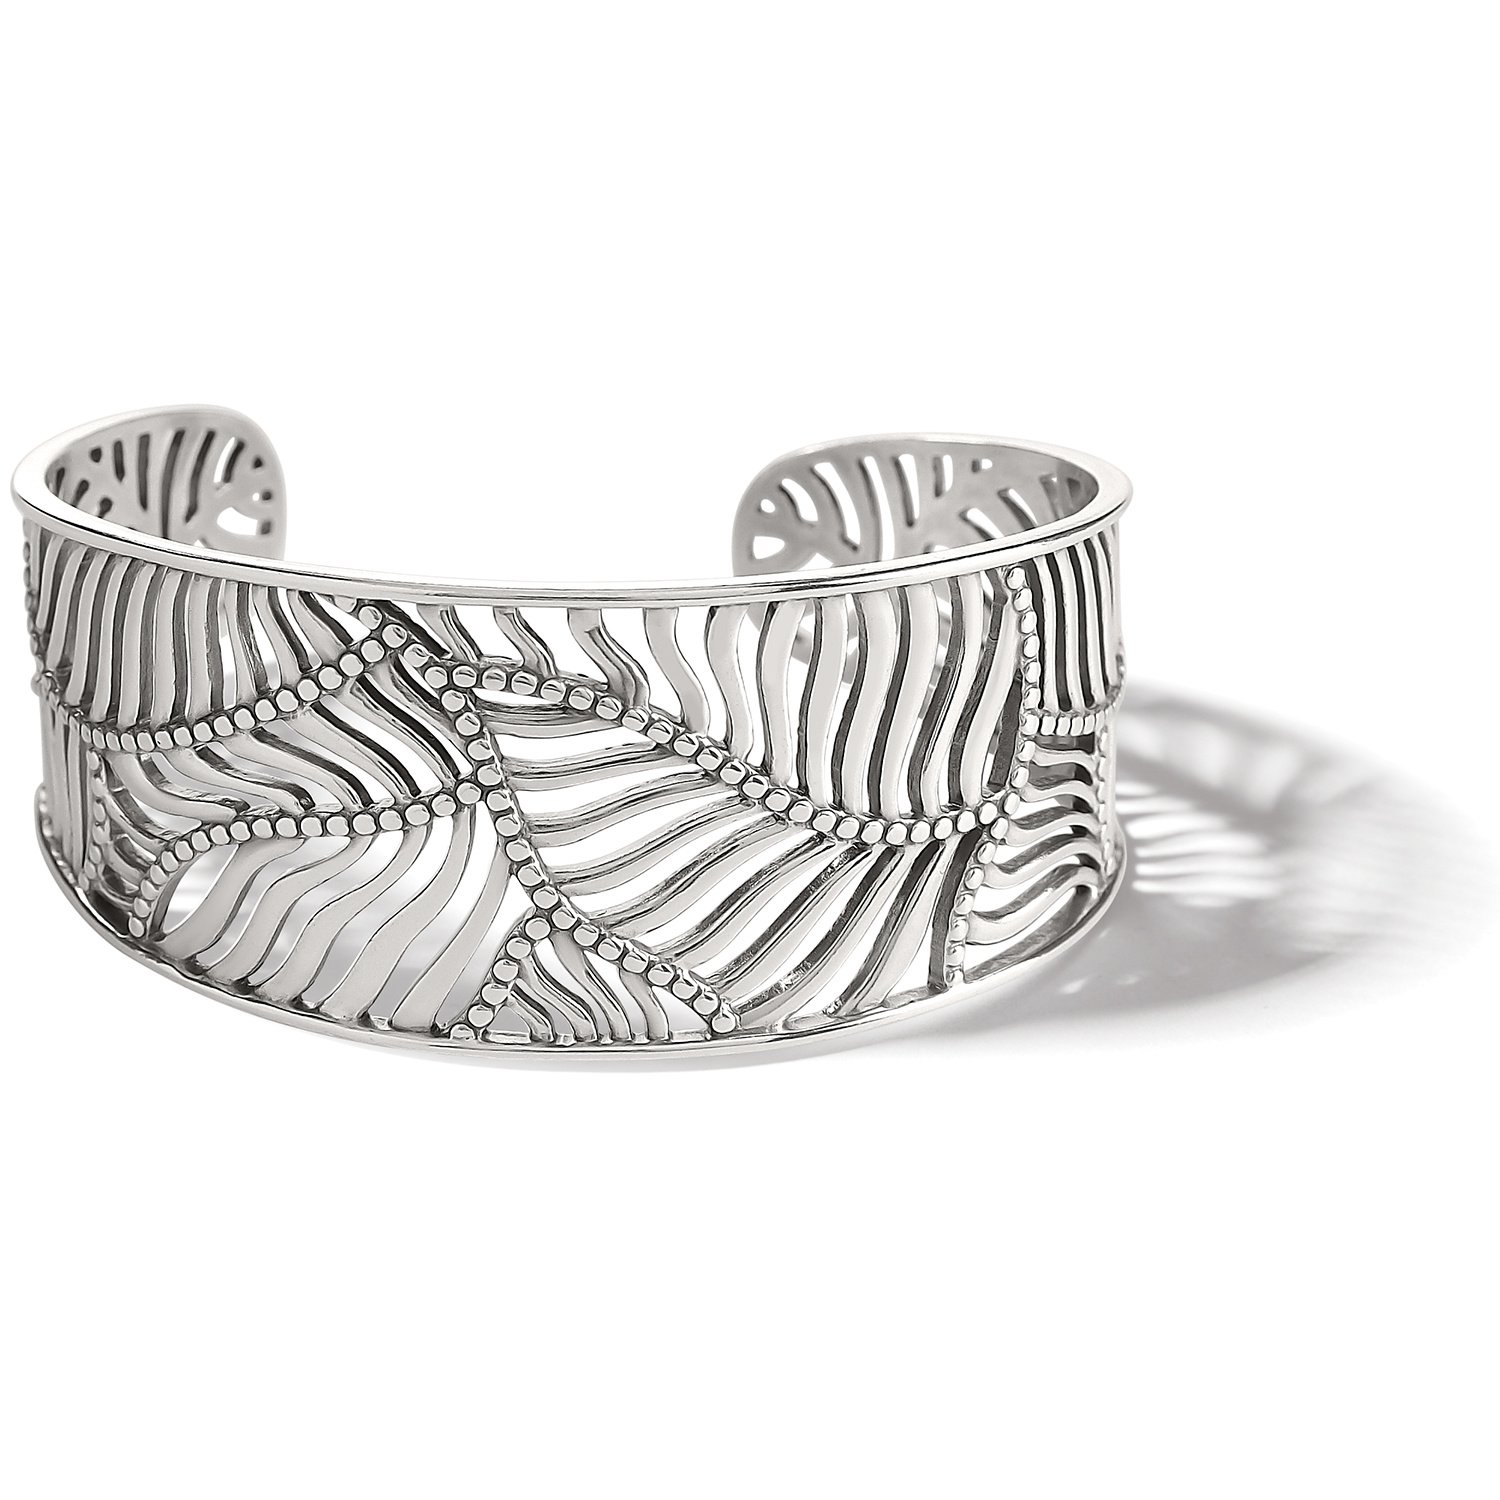 Urban Uptrend  Silver Cuff Bracelet  Paparazzi Accessories  Bling With  Dawn